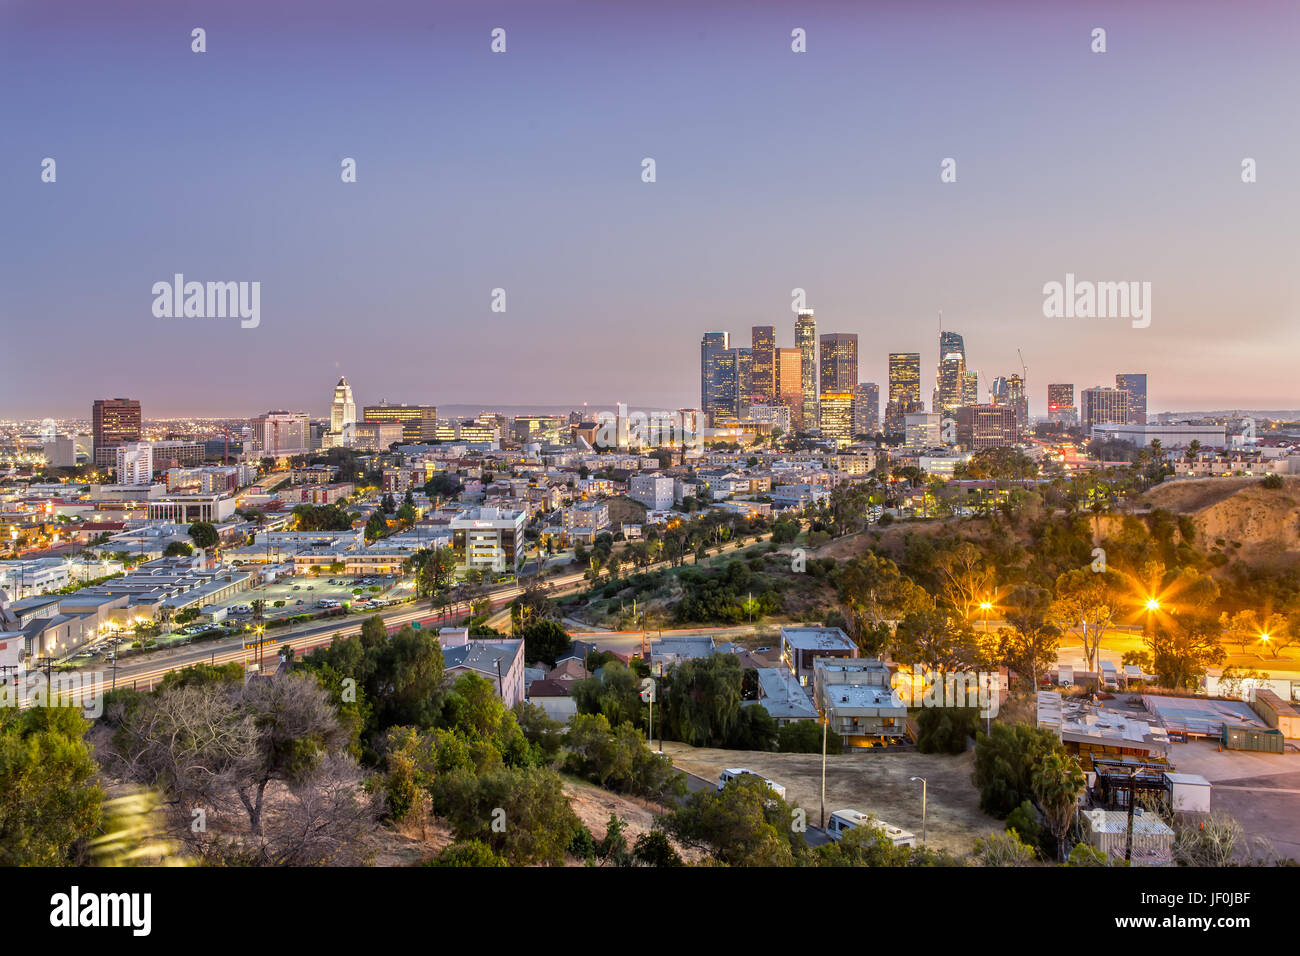 The Skyline of Los Angeles at Sunset Stock Photo